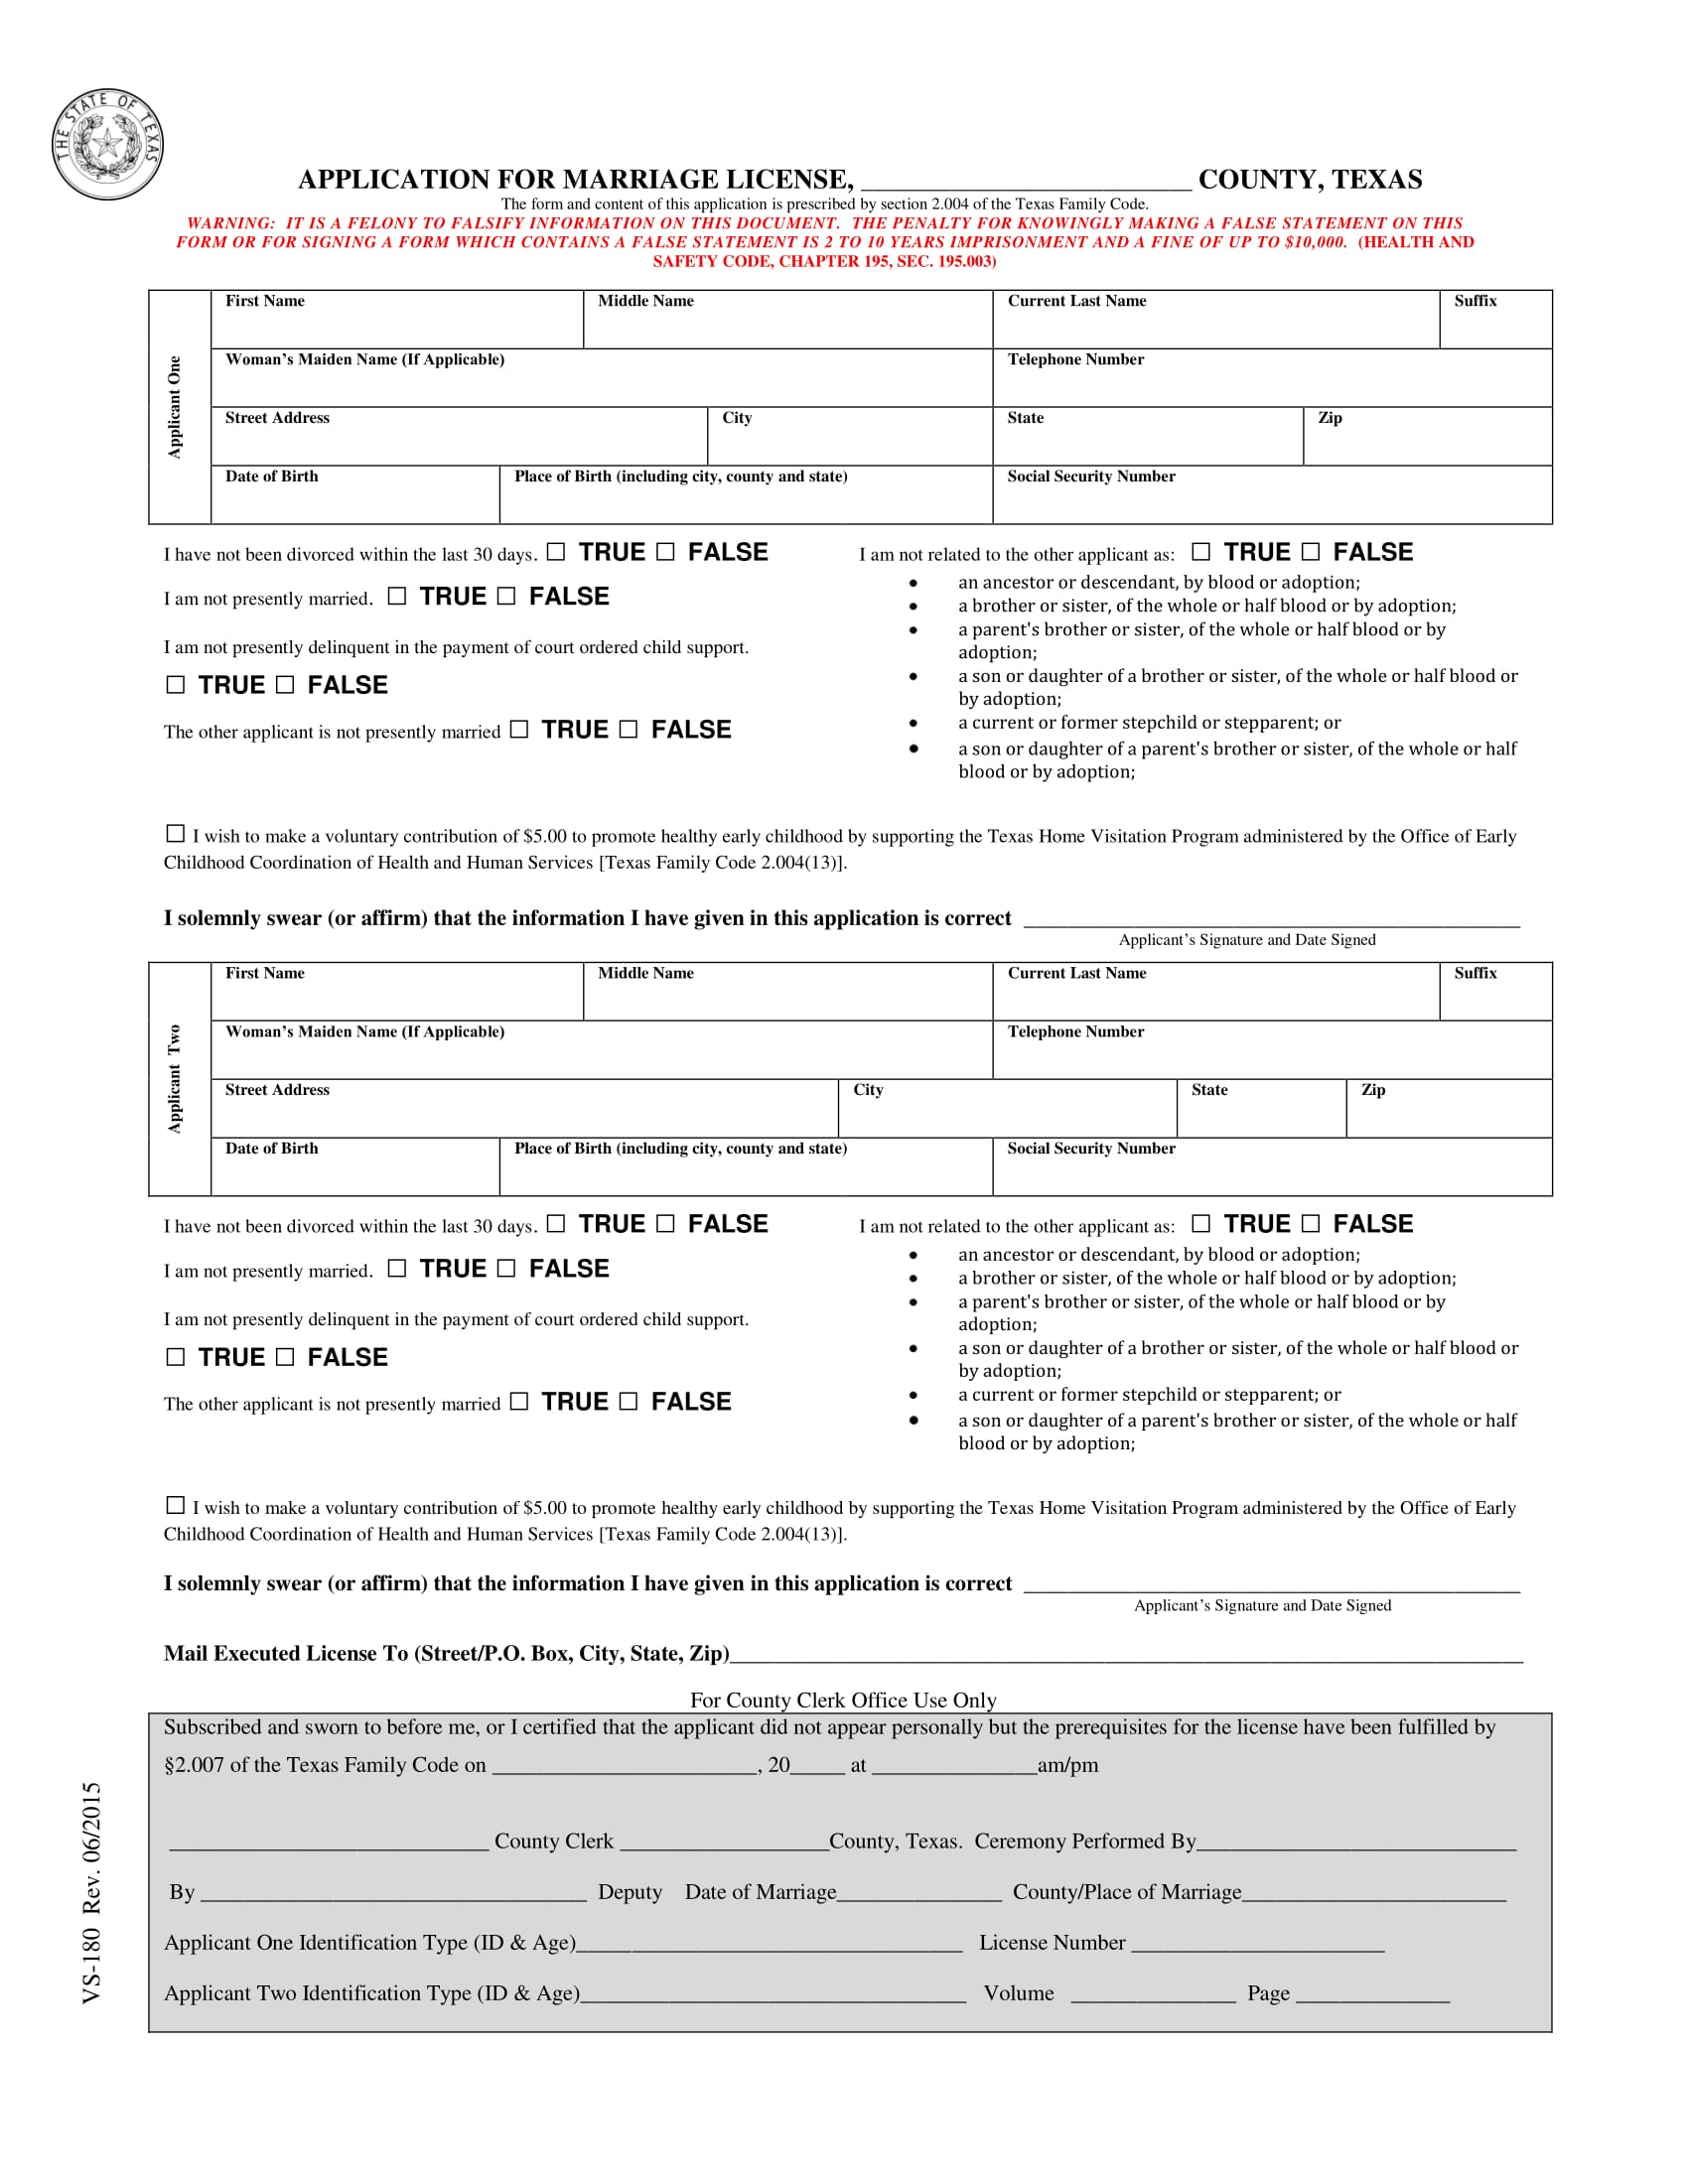 fillable license application form 1